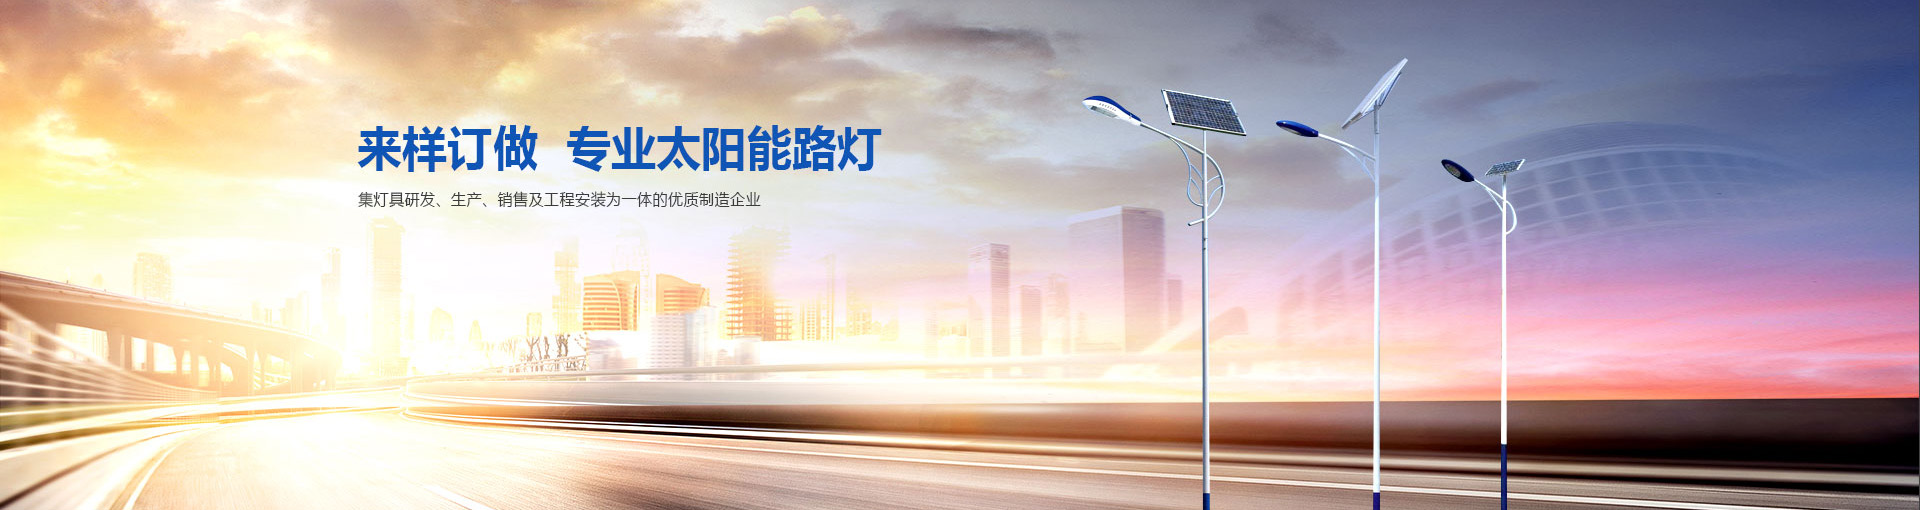 Products-Solar integrated street light-pude-yuanyang